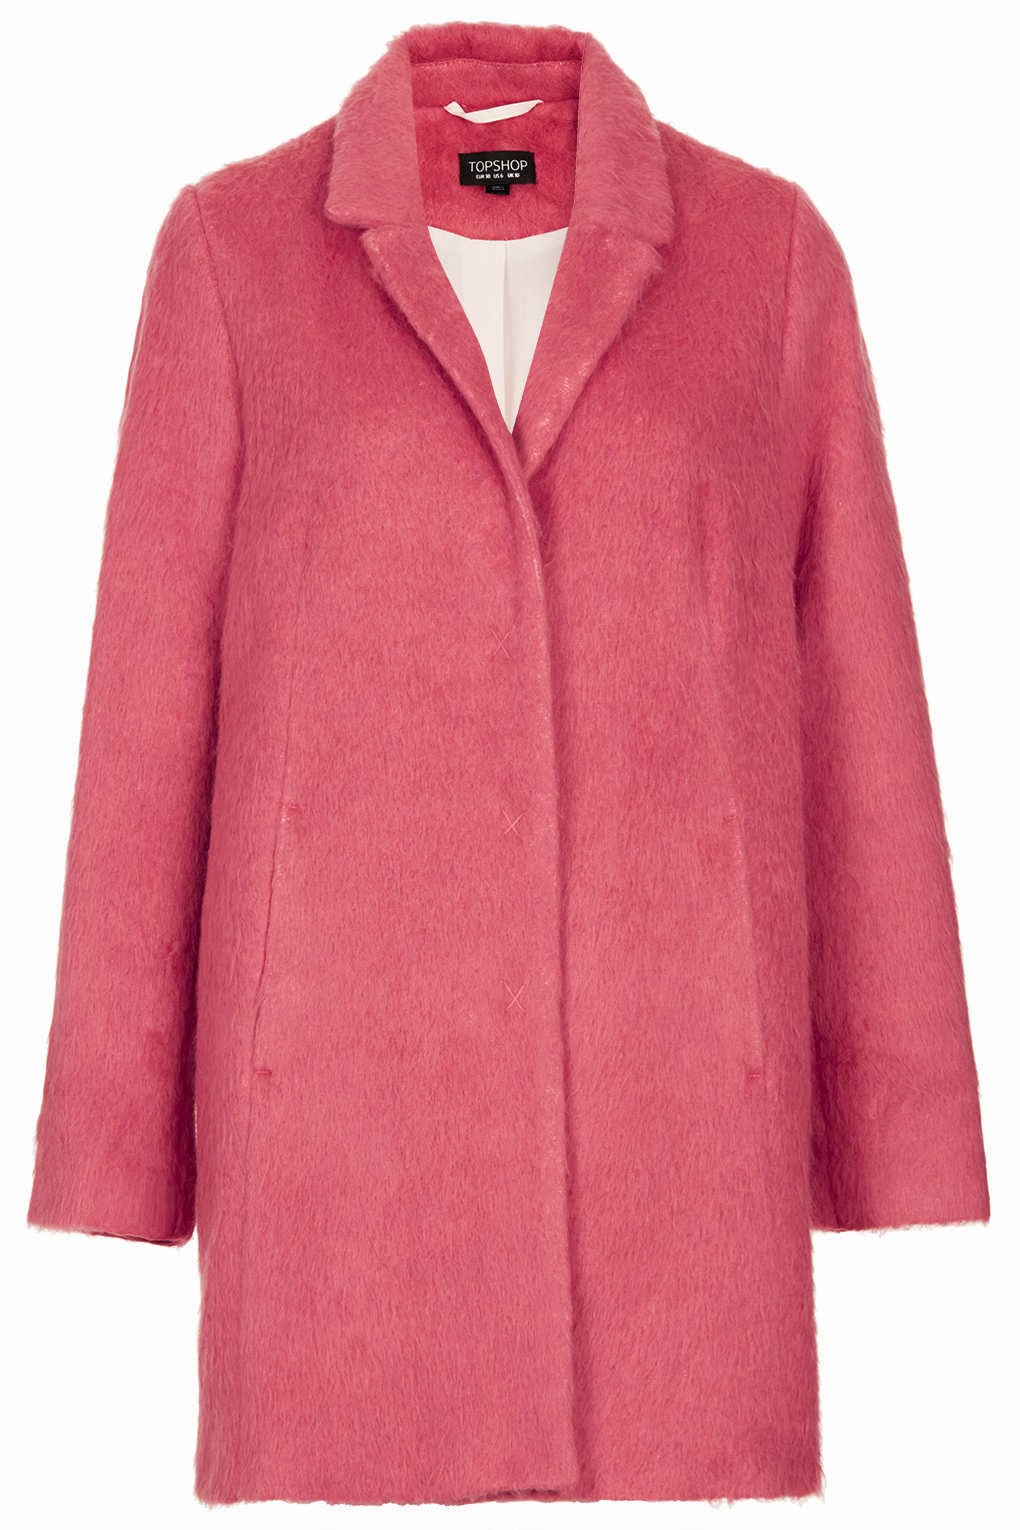 Pink coats part 2 - let's see what's still left out there! - Style Guile